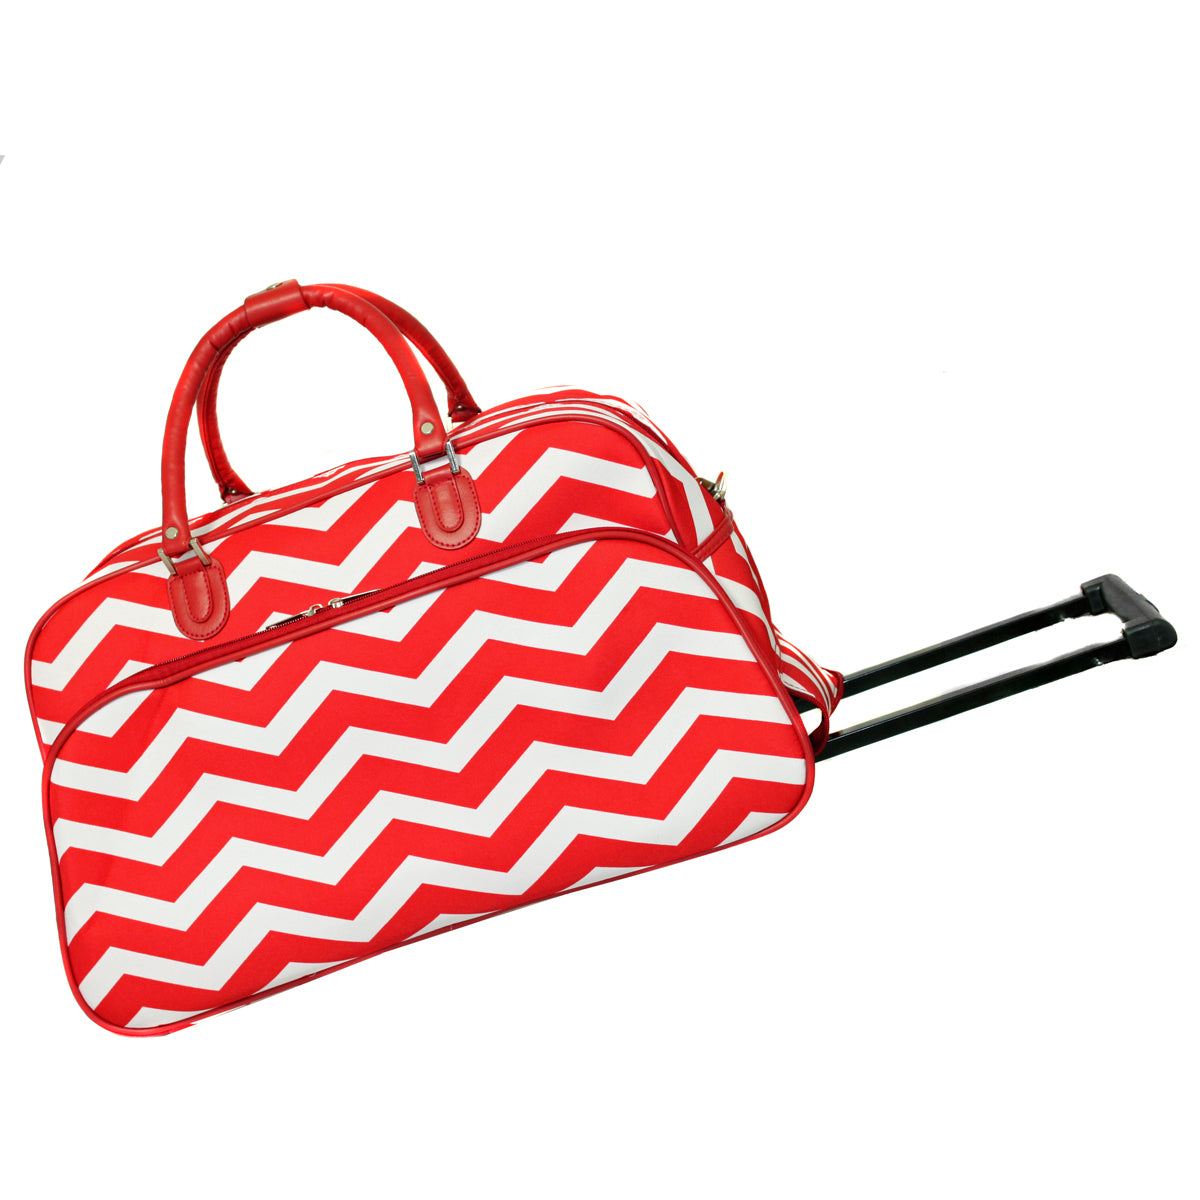 CalBags Chevron 21" Rolling Carry-On Duffel Bags